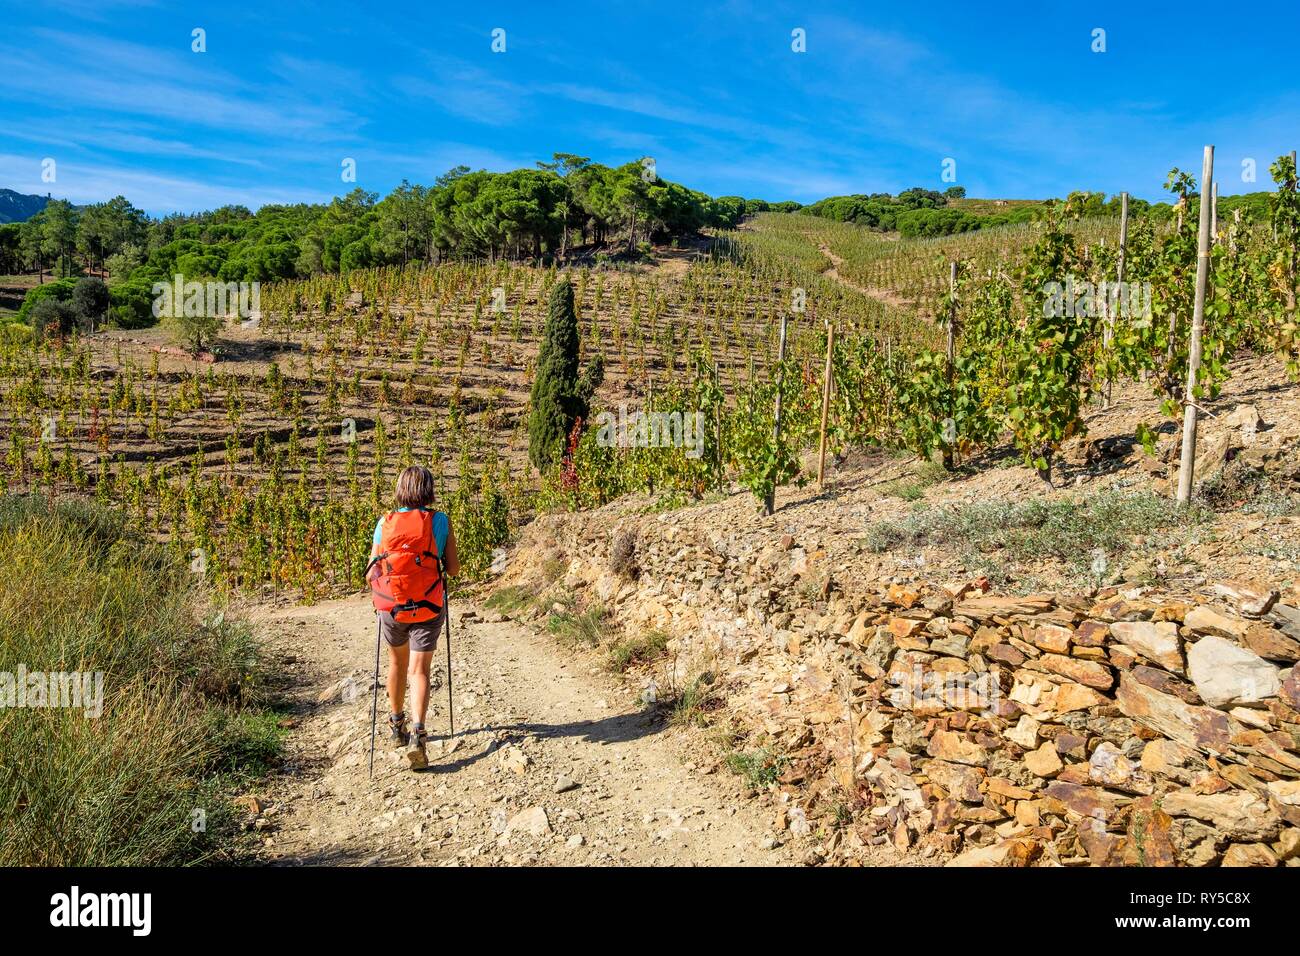 France, Pyrenees Orientales, Cote Vermeille, hiking from Port-Vendres to Banyuls on the coastal path, Banyuls vineyard Stock Photo